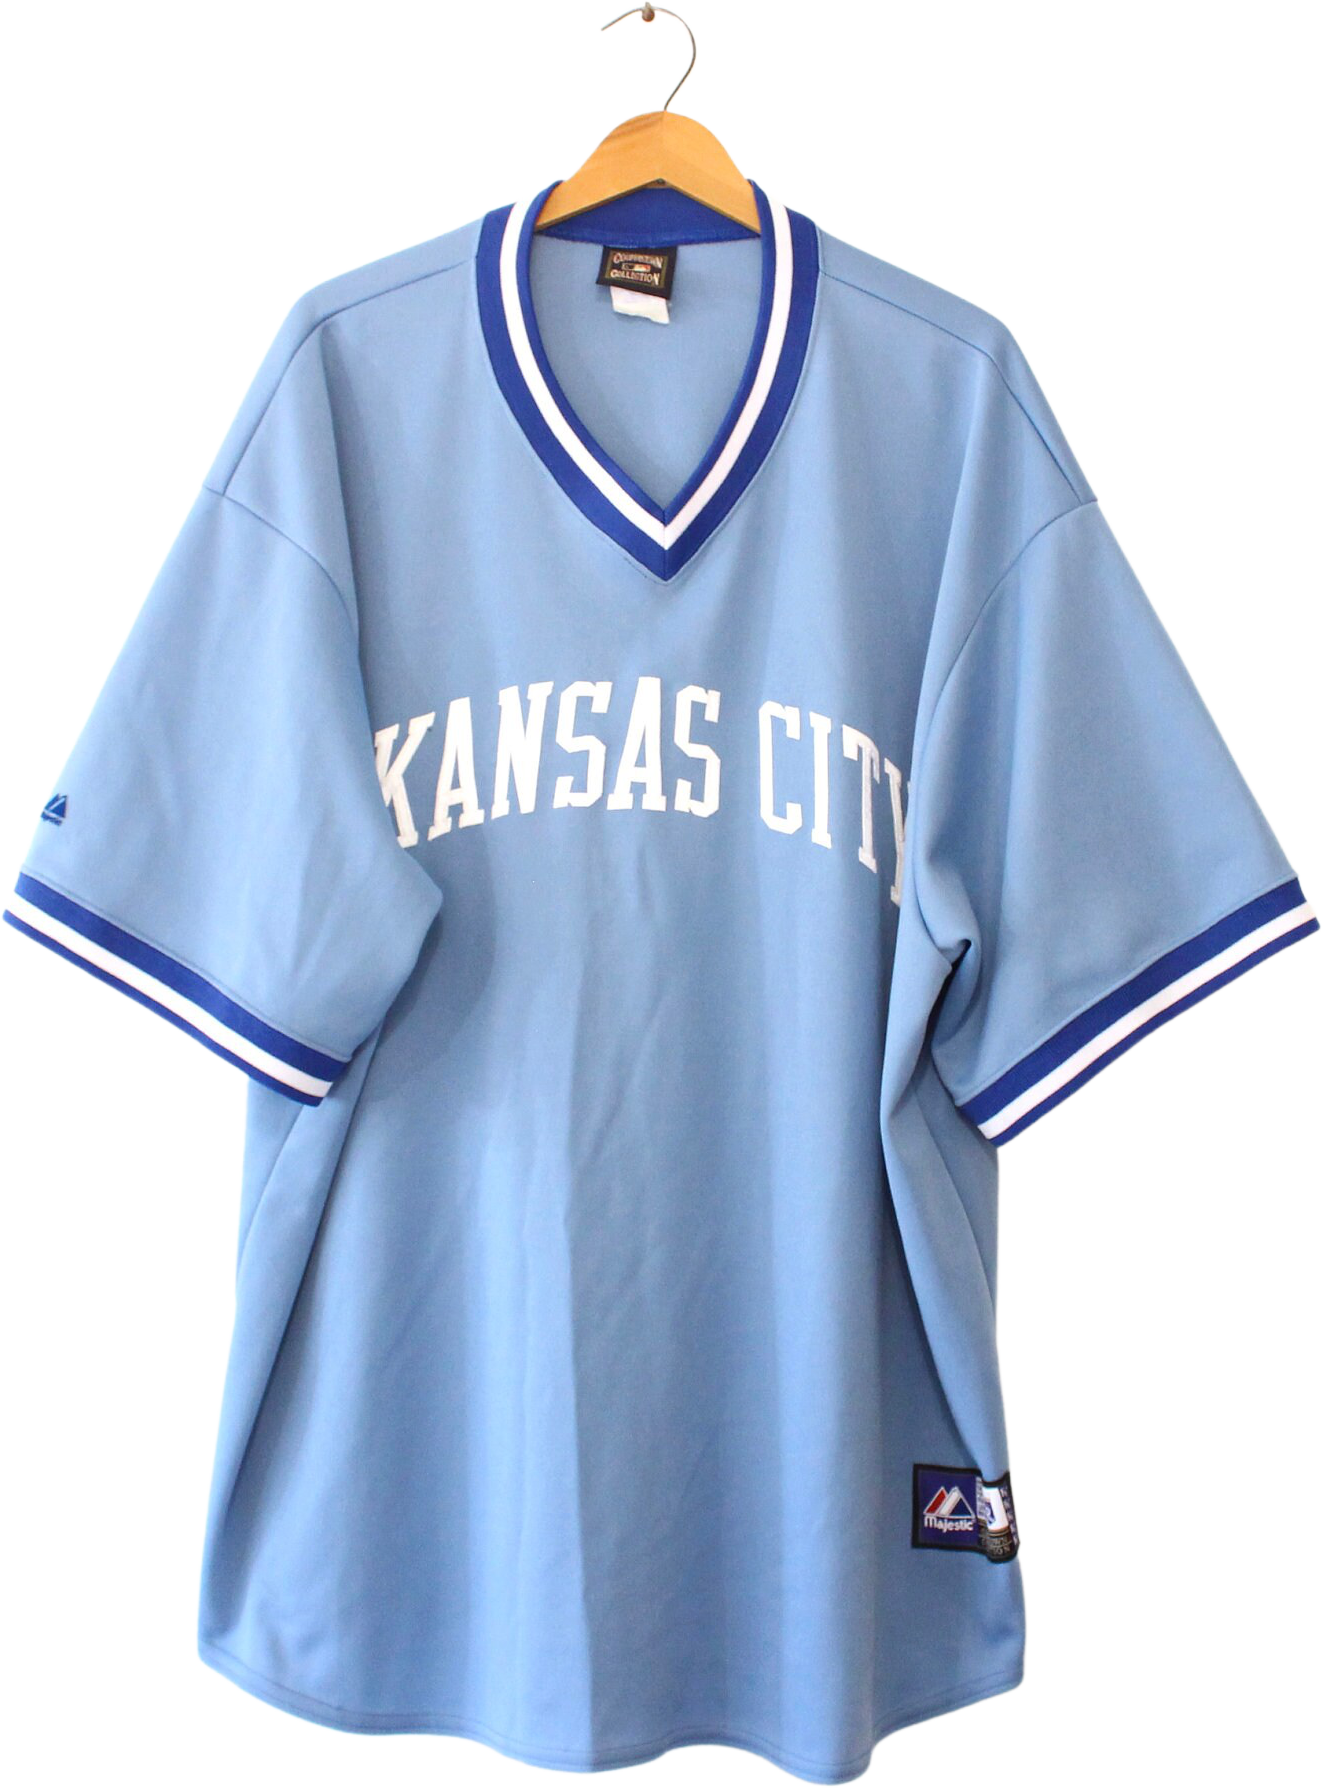 Vintage Kansas City Royals Baseball Jersey by Cooperstown Collection